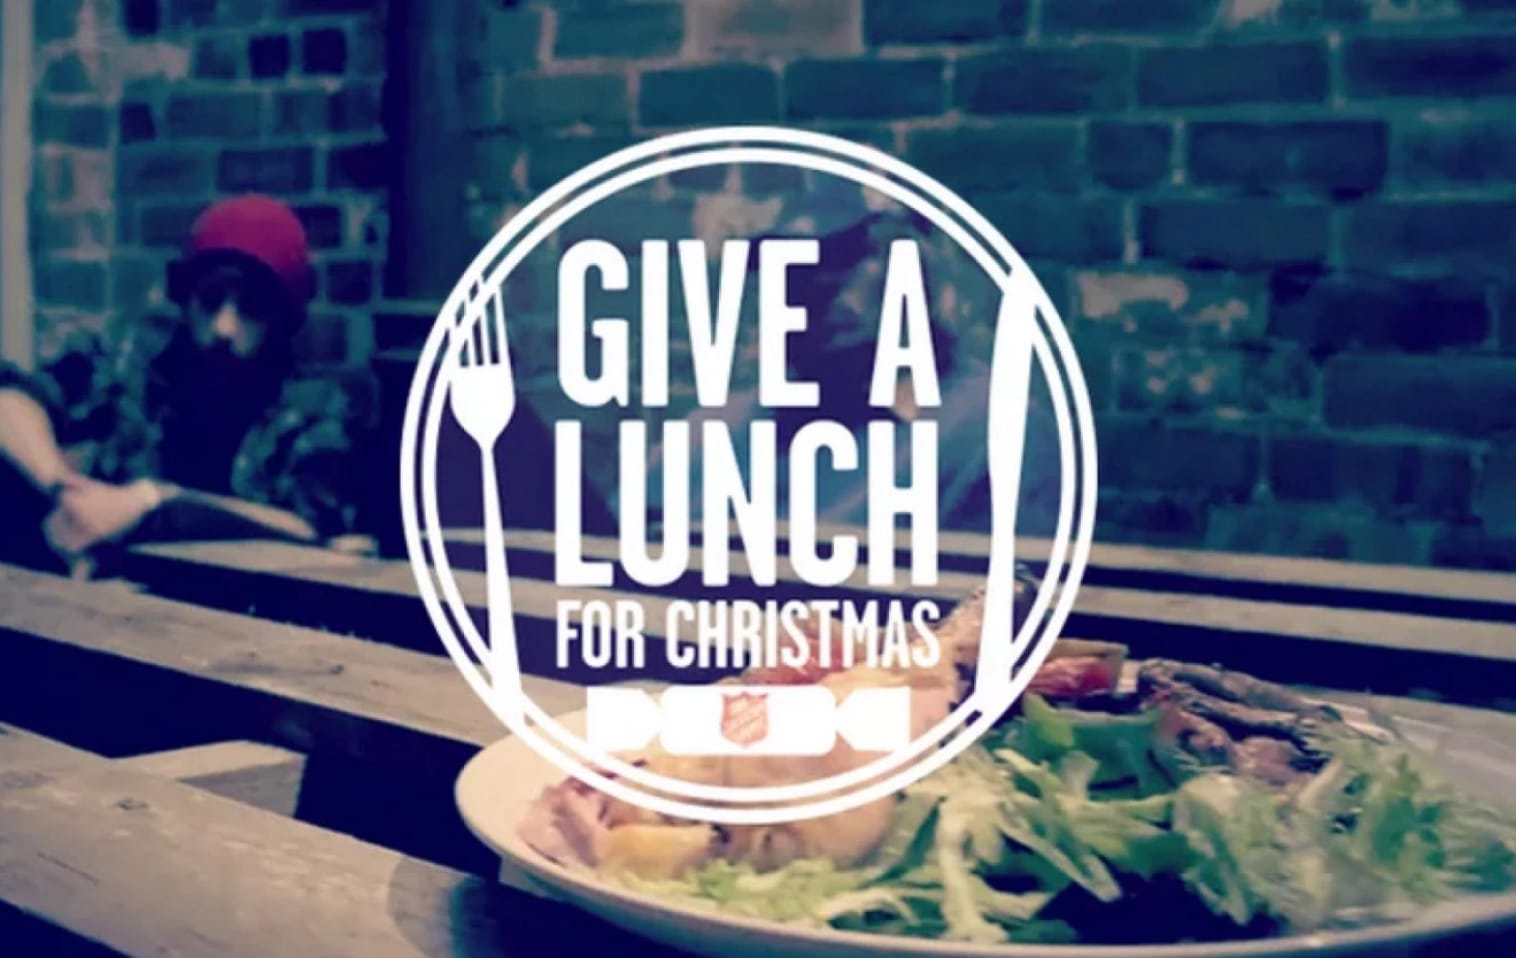 "Give a lunch for Christmas" campaign lockup overlayed on an image of a dinner plate